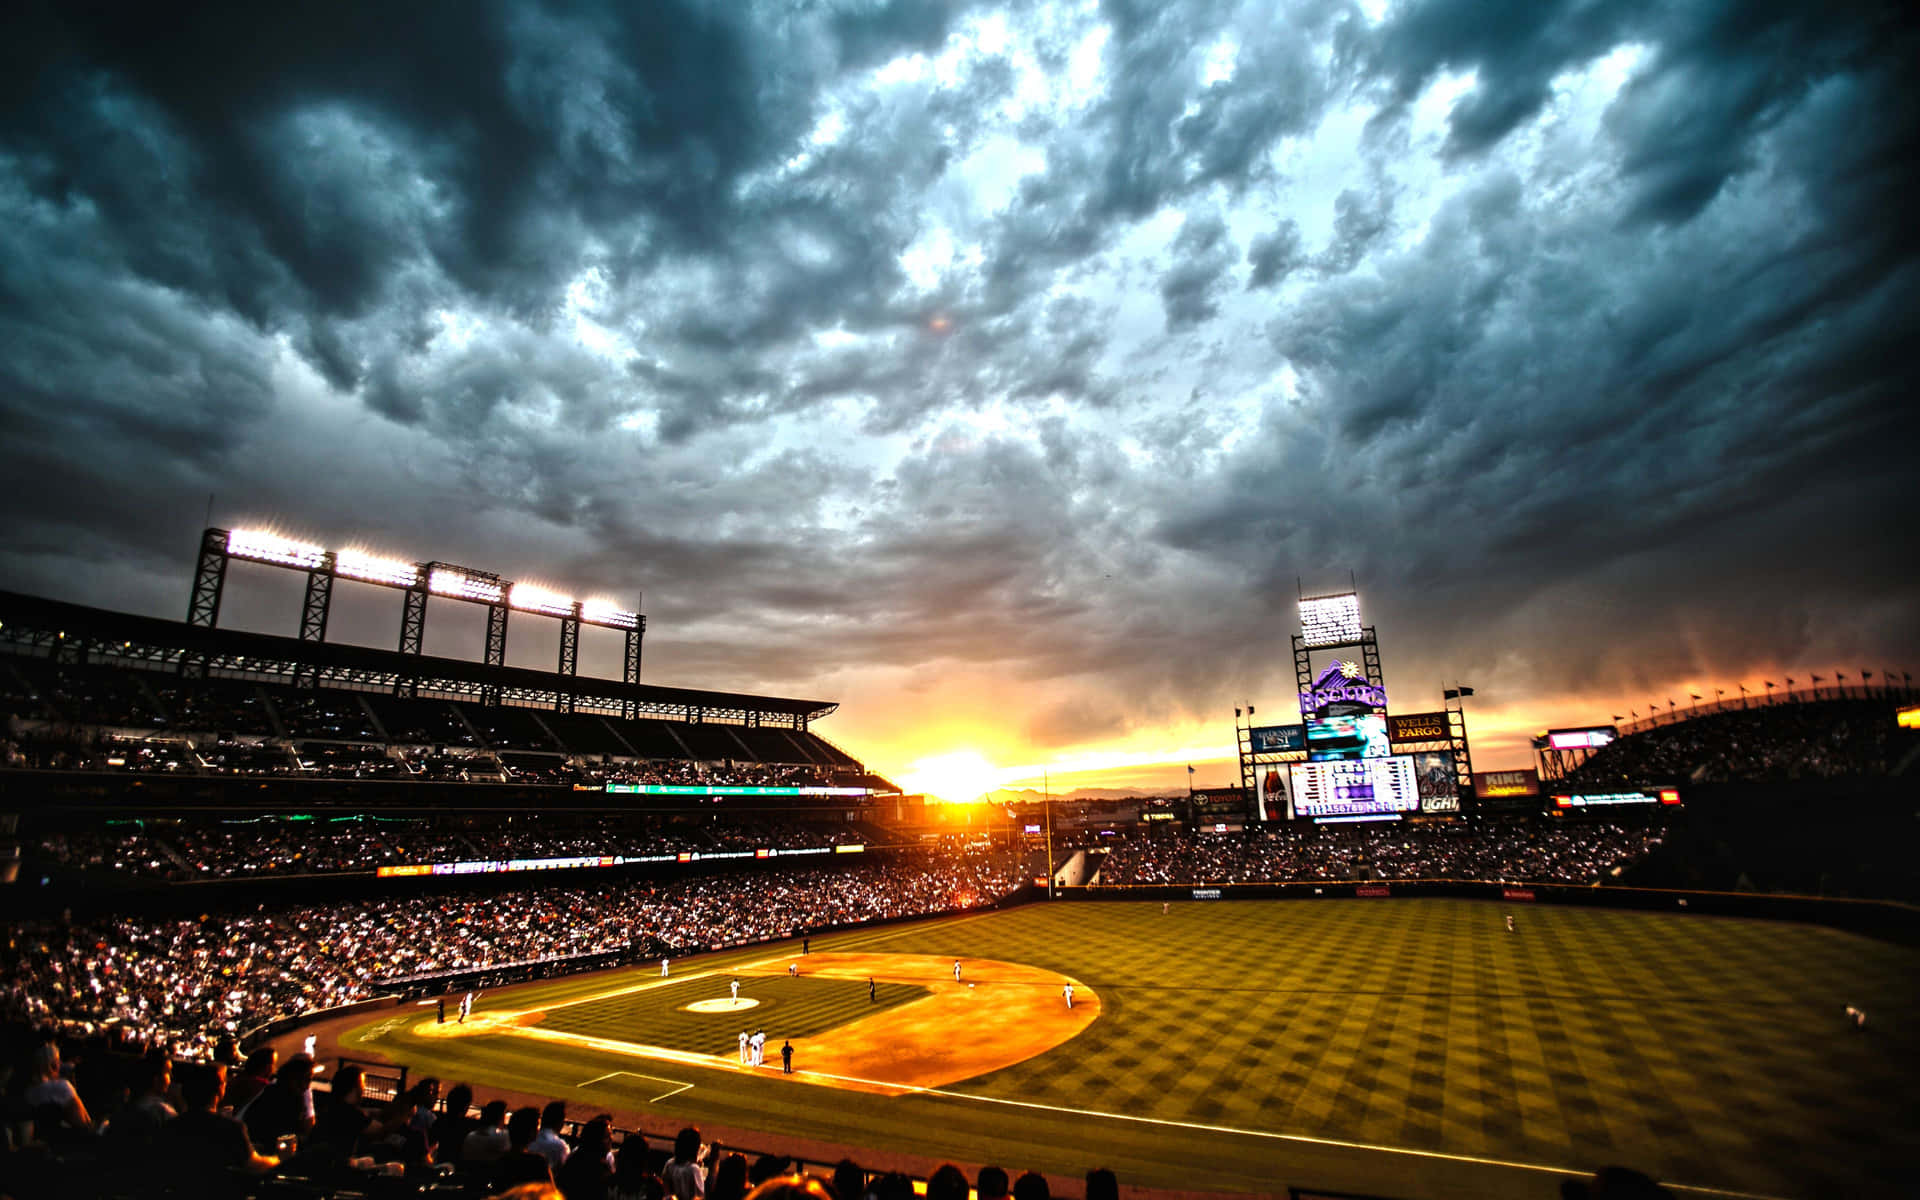 Enjoy the Epic View of a Baseball Field